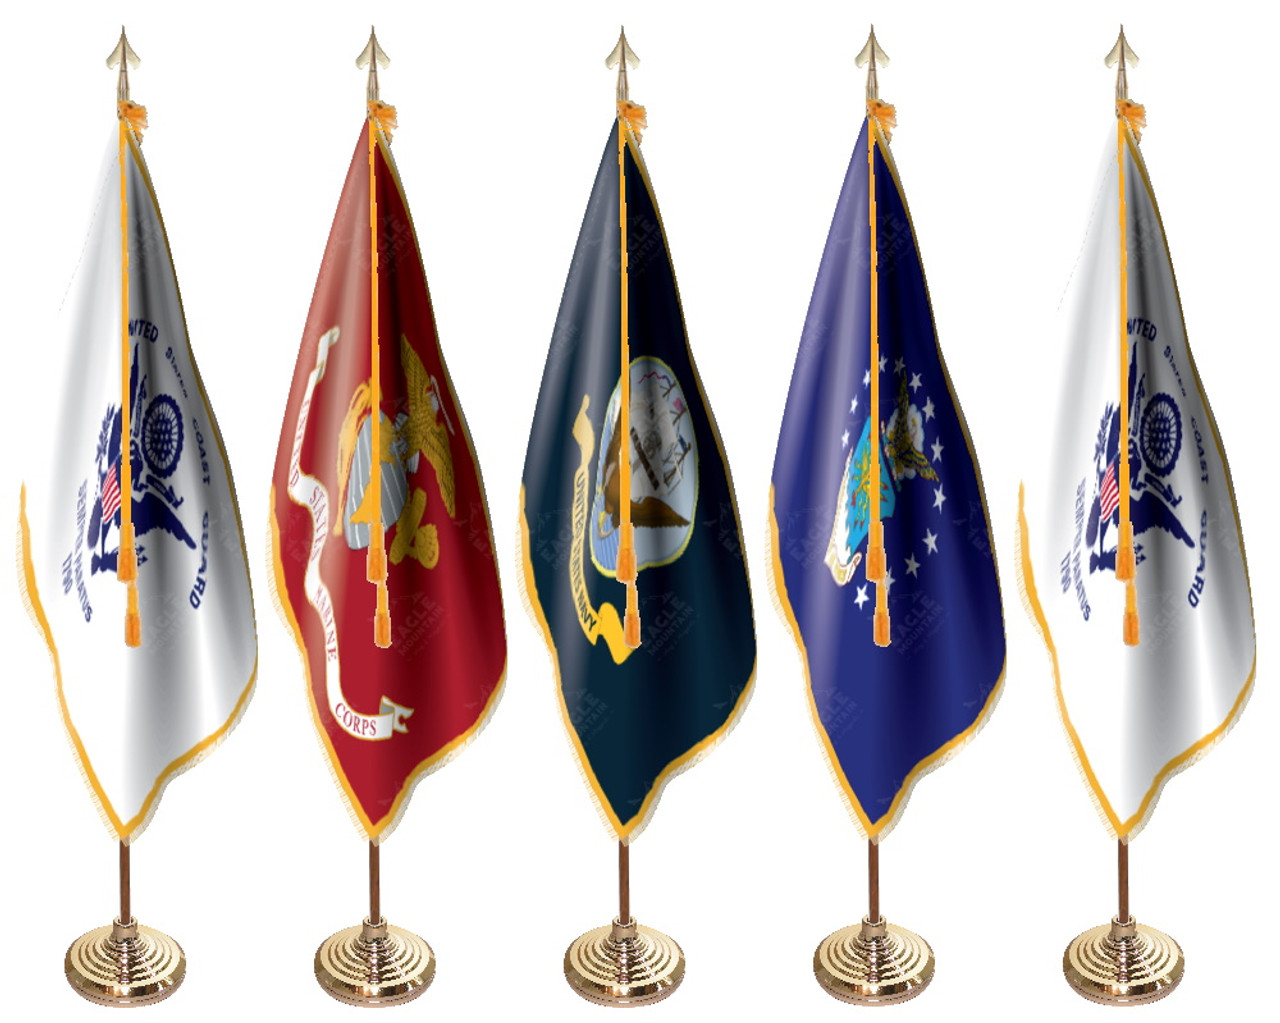 Deluxe Indoor and Parade Military Flag Set with 8' Presentation Hardware and Staff Spears, 3' x 5' (Set of 5 Flags), PRSET-MILSET-35-G-8-Staff (Open Market)